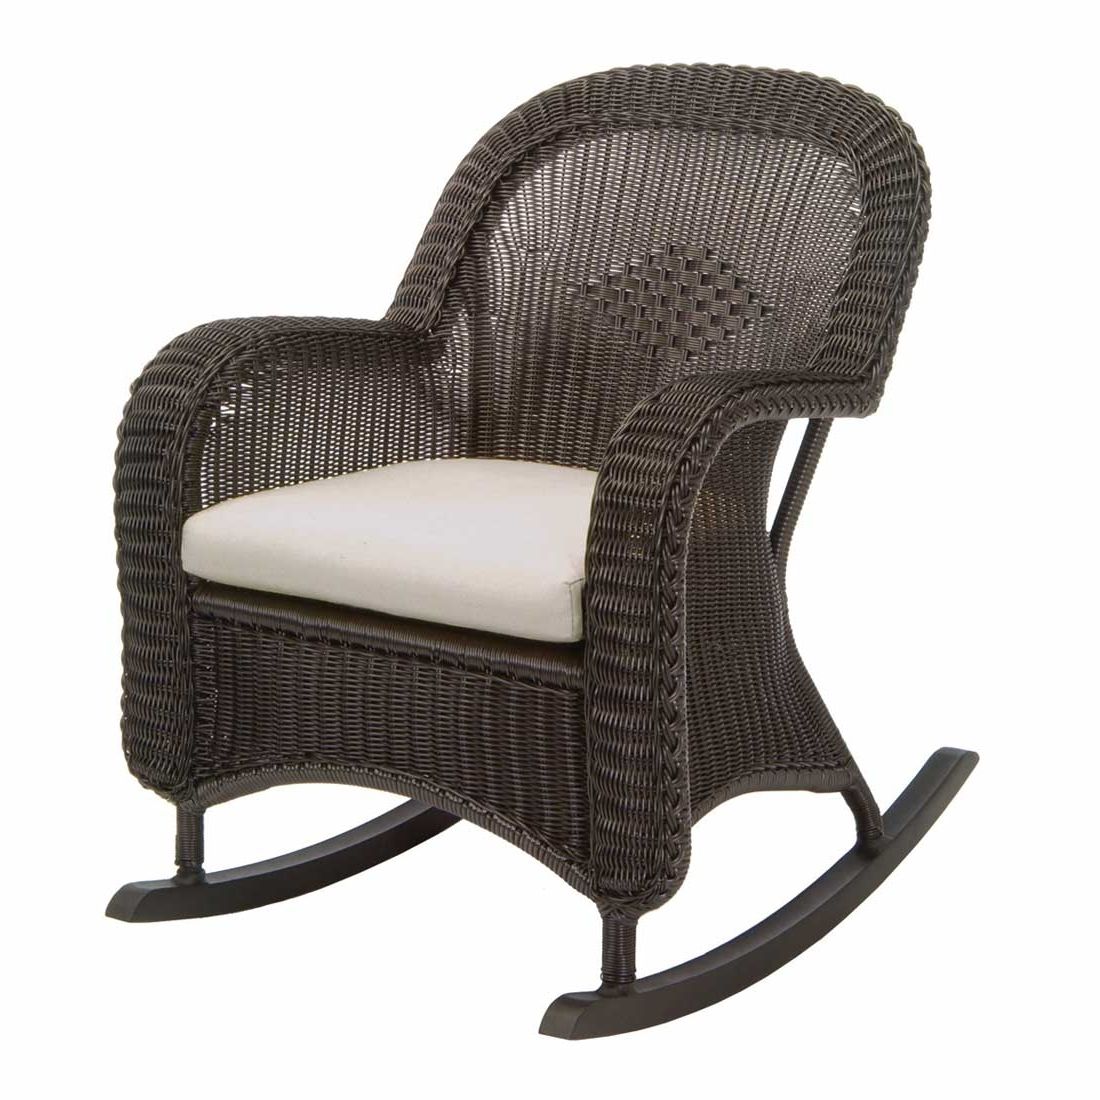 Recent Classic Outdoor Wicker Rocking Chair Throughout Resin Wicker Rocking Chairs (View 14 of 15)